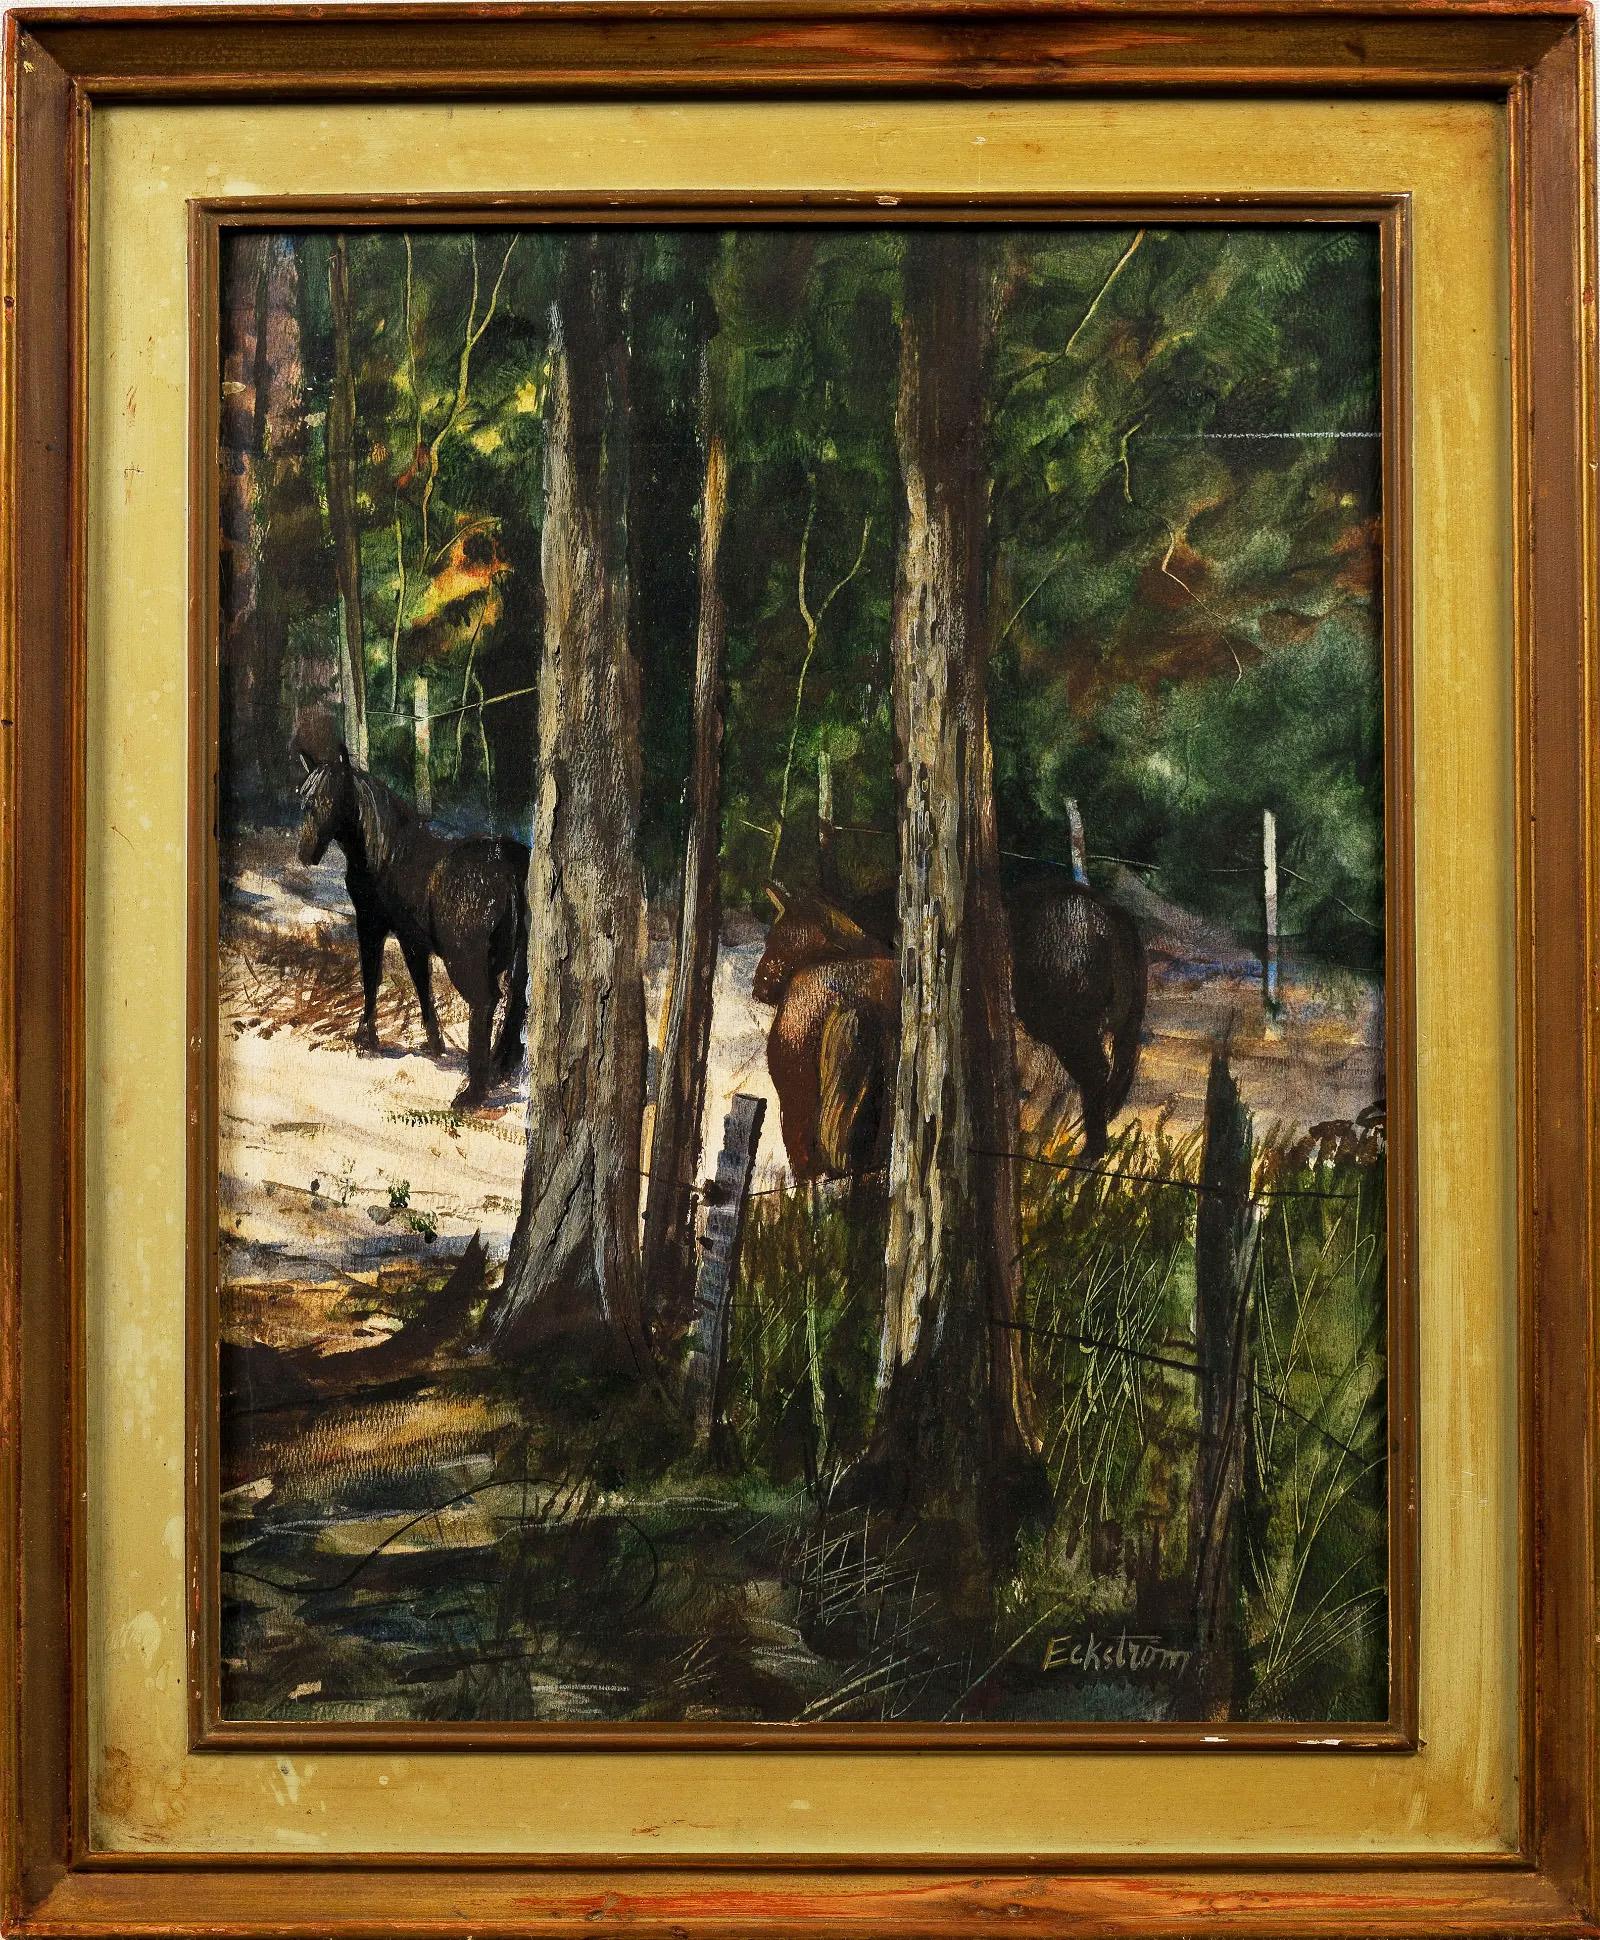 Cynthia Norton Eckstrom  Landscape Painting - Vintage Signed Southern Pine Forest Wild Horse Sand Trail Framed Oil Painting